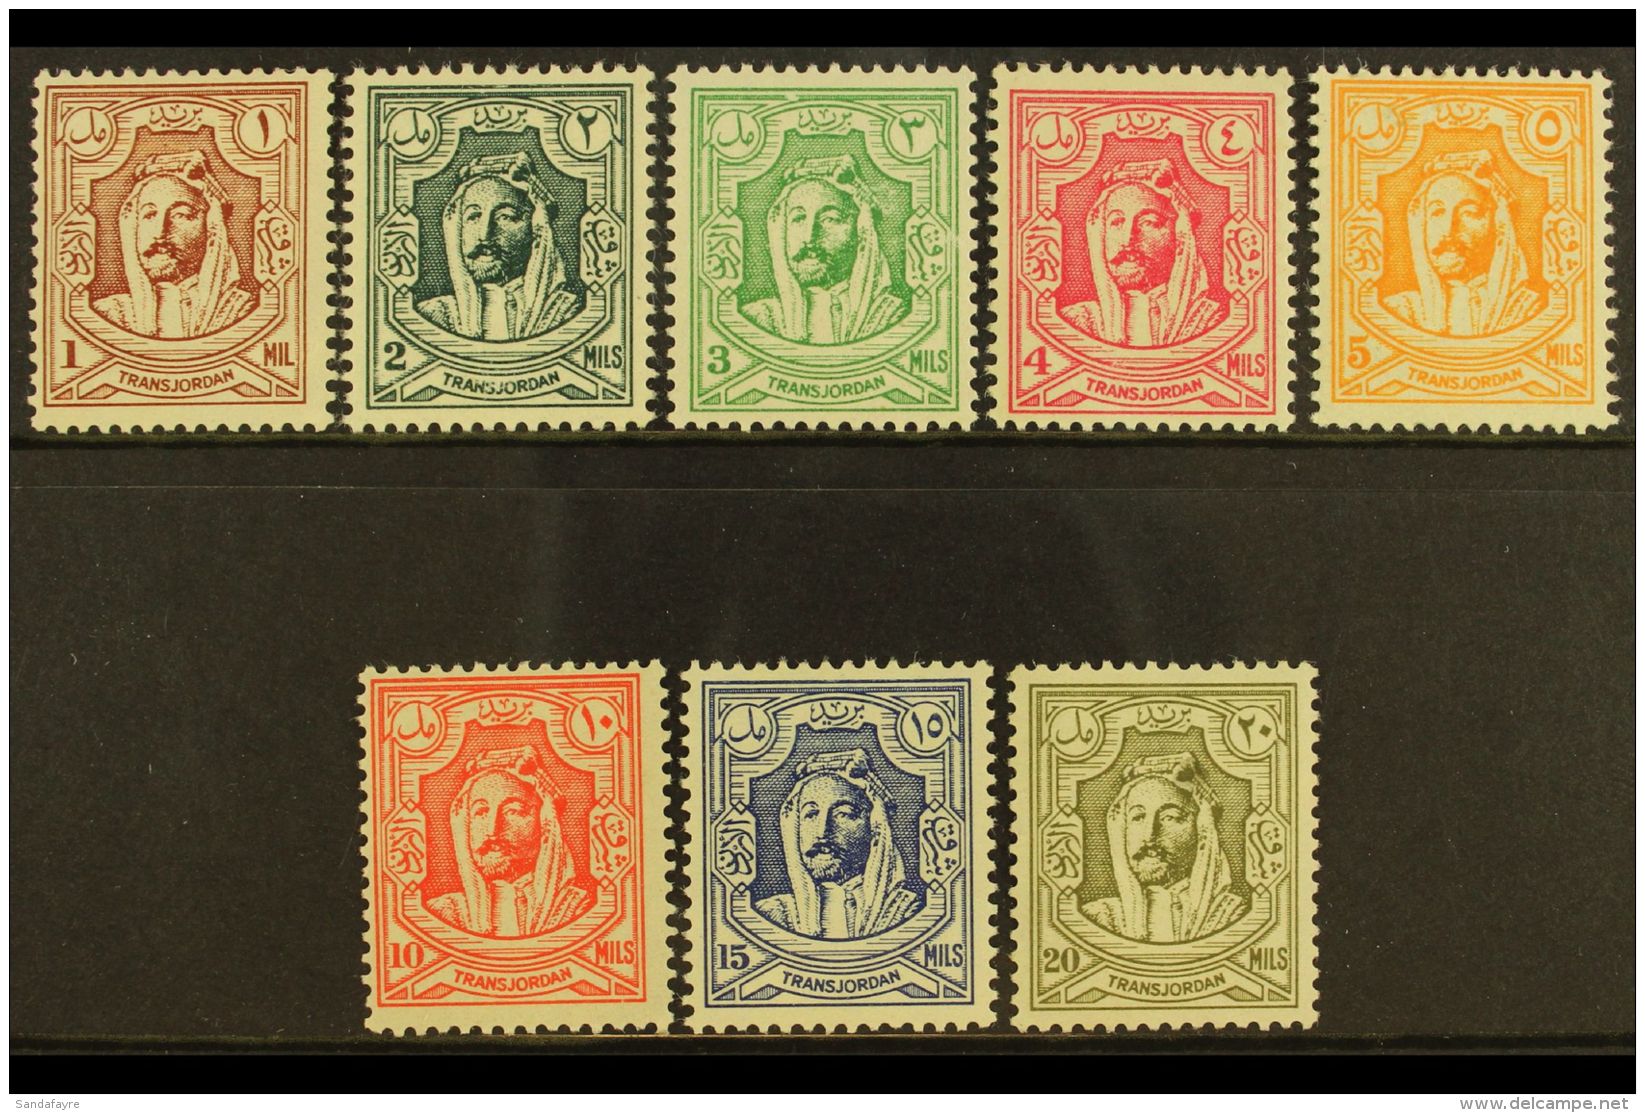 1942 Emir Set, Lithographed, SG 222/9, Very Fine And Fresh Mint. (8 Stamps) For More Images, Please Visit... - Jordanie